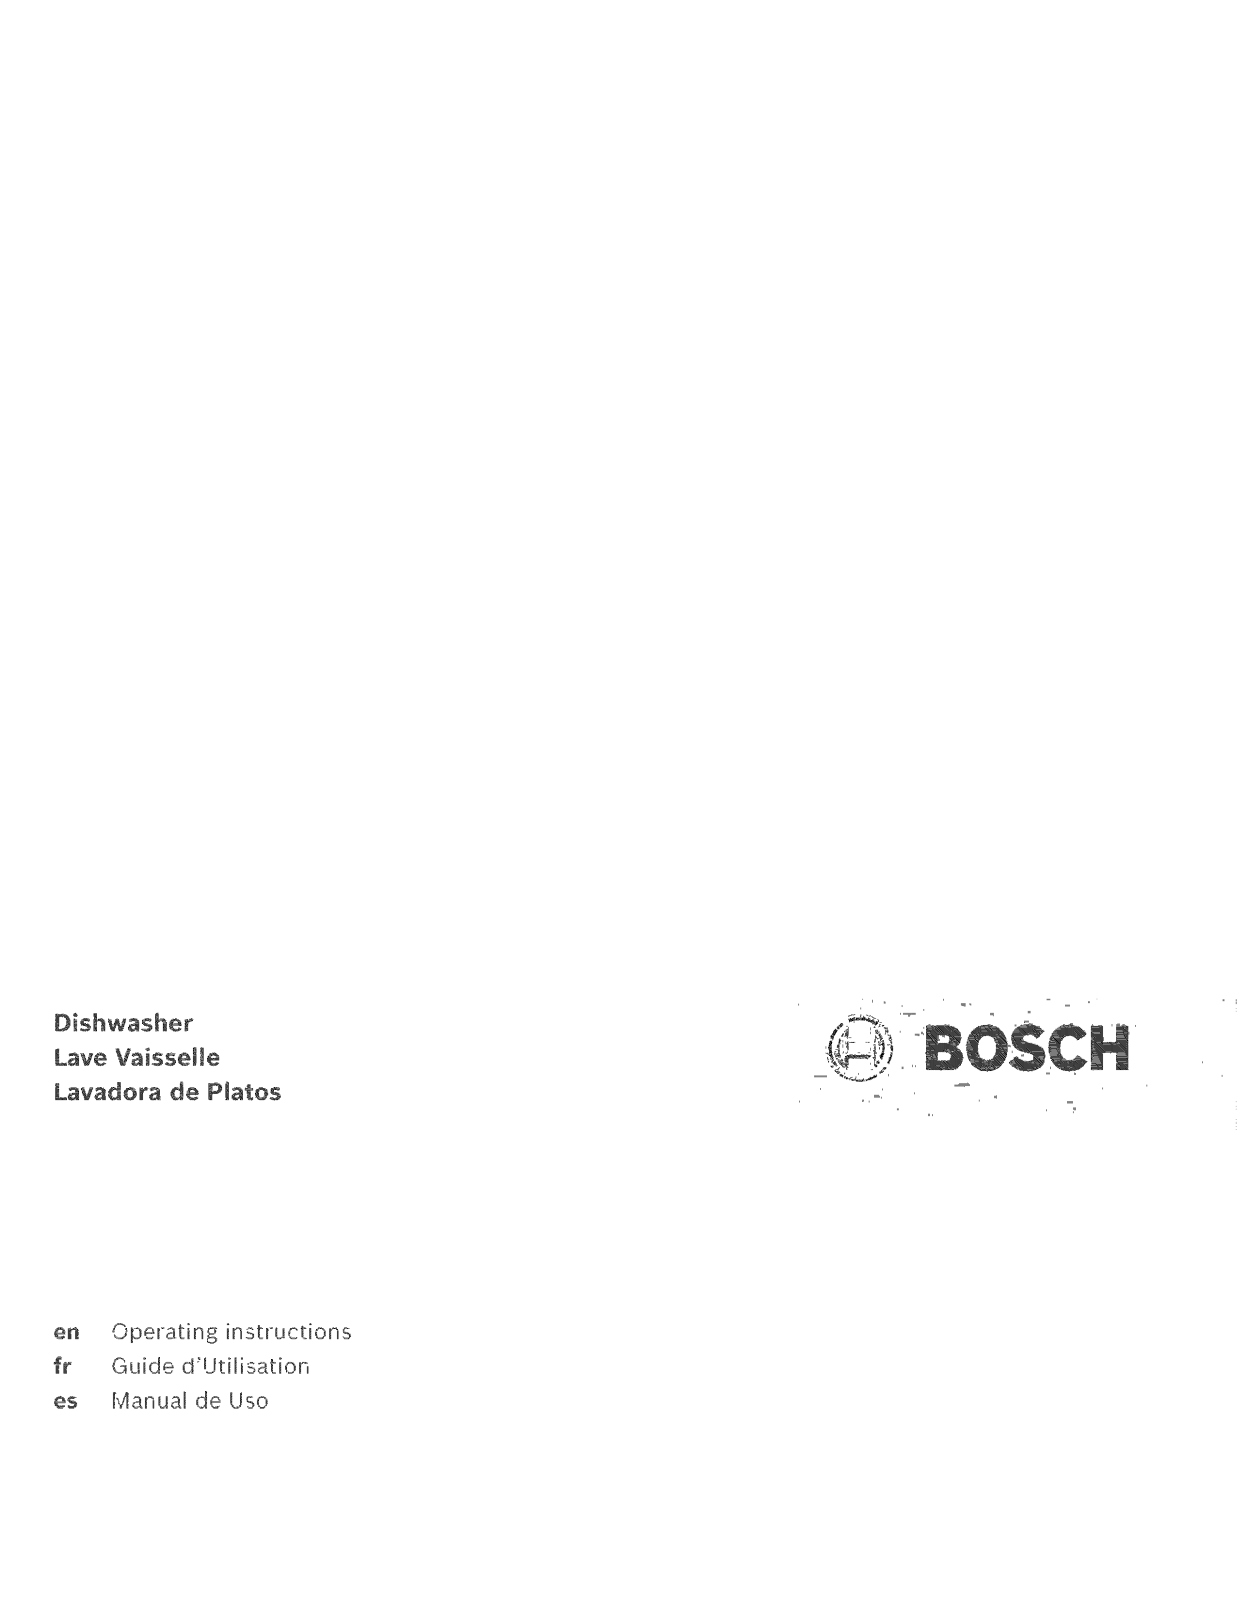 Bosch SGE63E06UC/55, SGE63E06UC/52, SGE63E06UC/51, SGE63E06UC/48, SGE63E06UC/44 Owner’s Manual